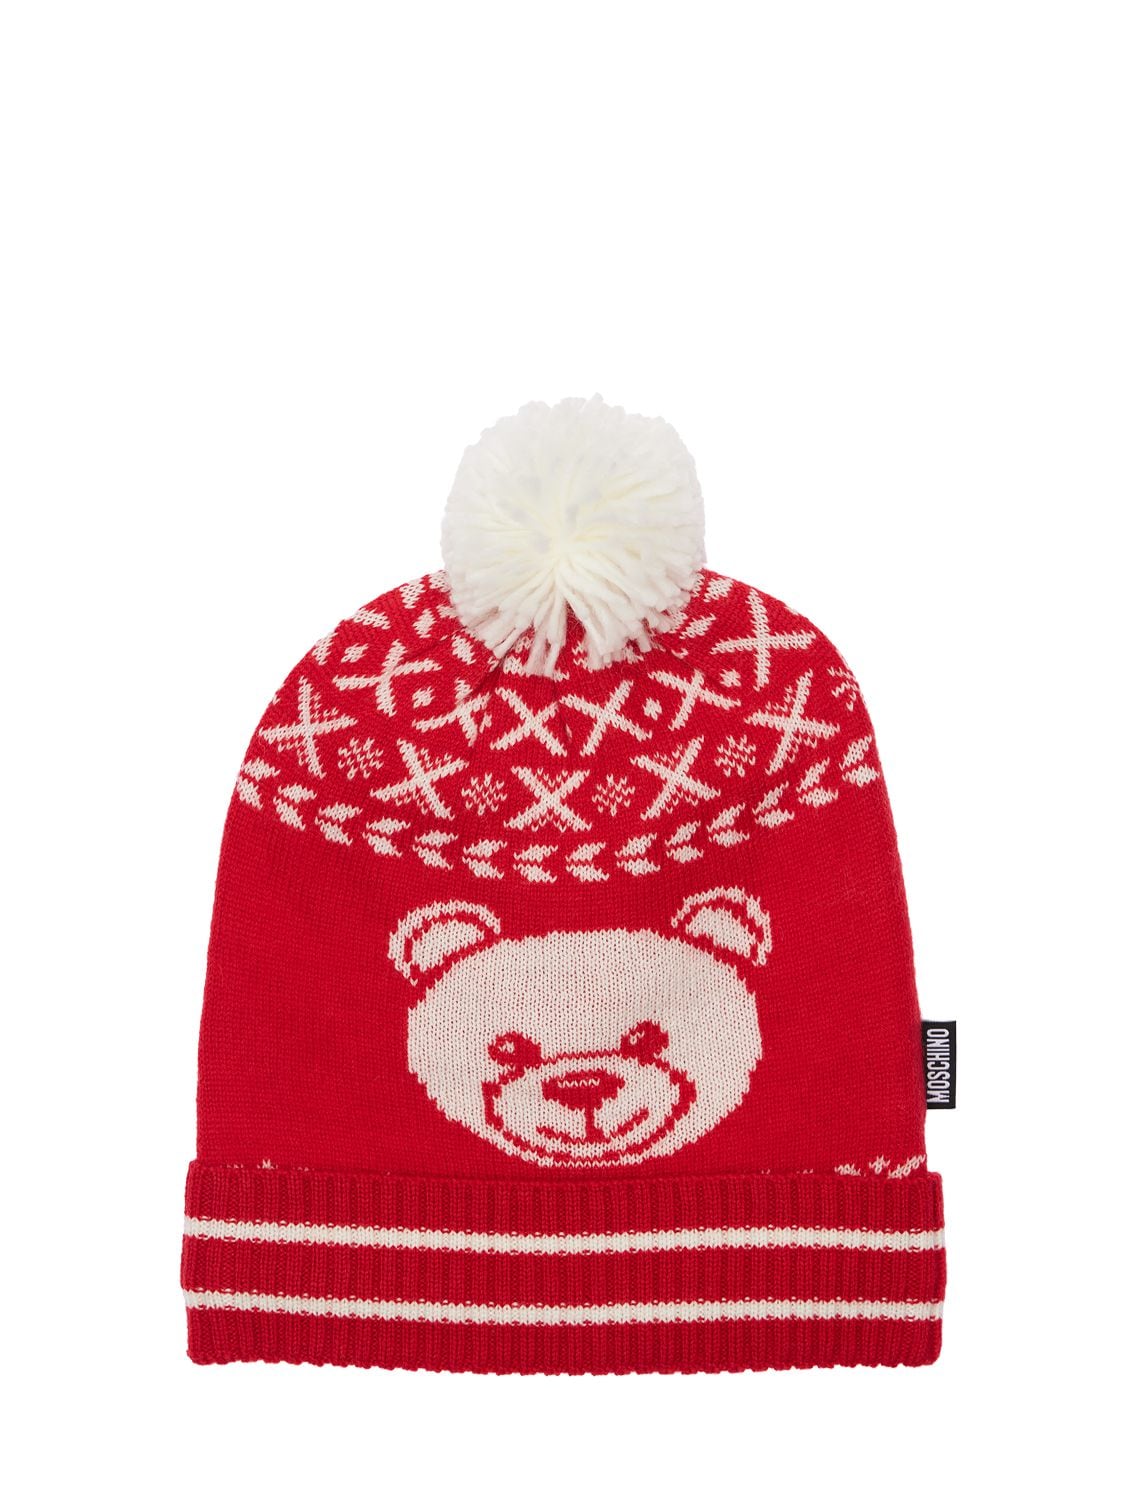 Moschino Babies' Jacquard Wool Blend Knit Beanie Hat In Red